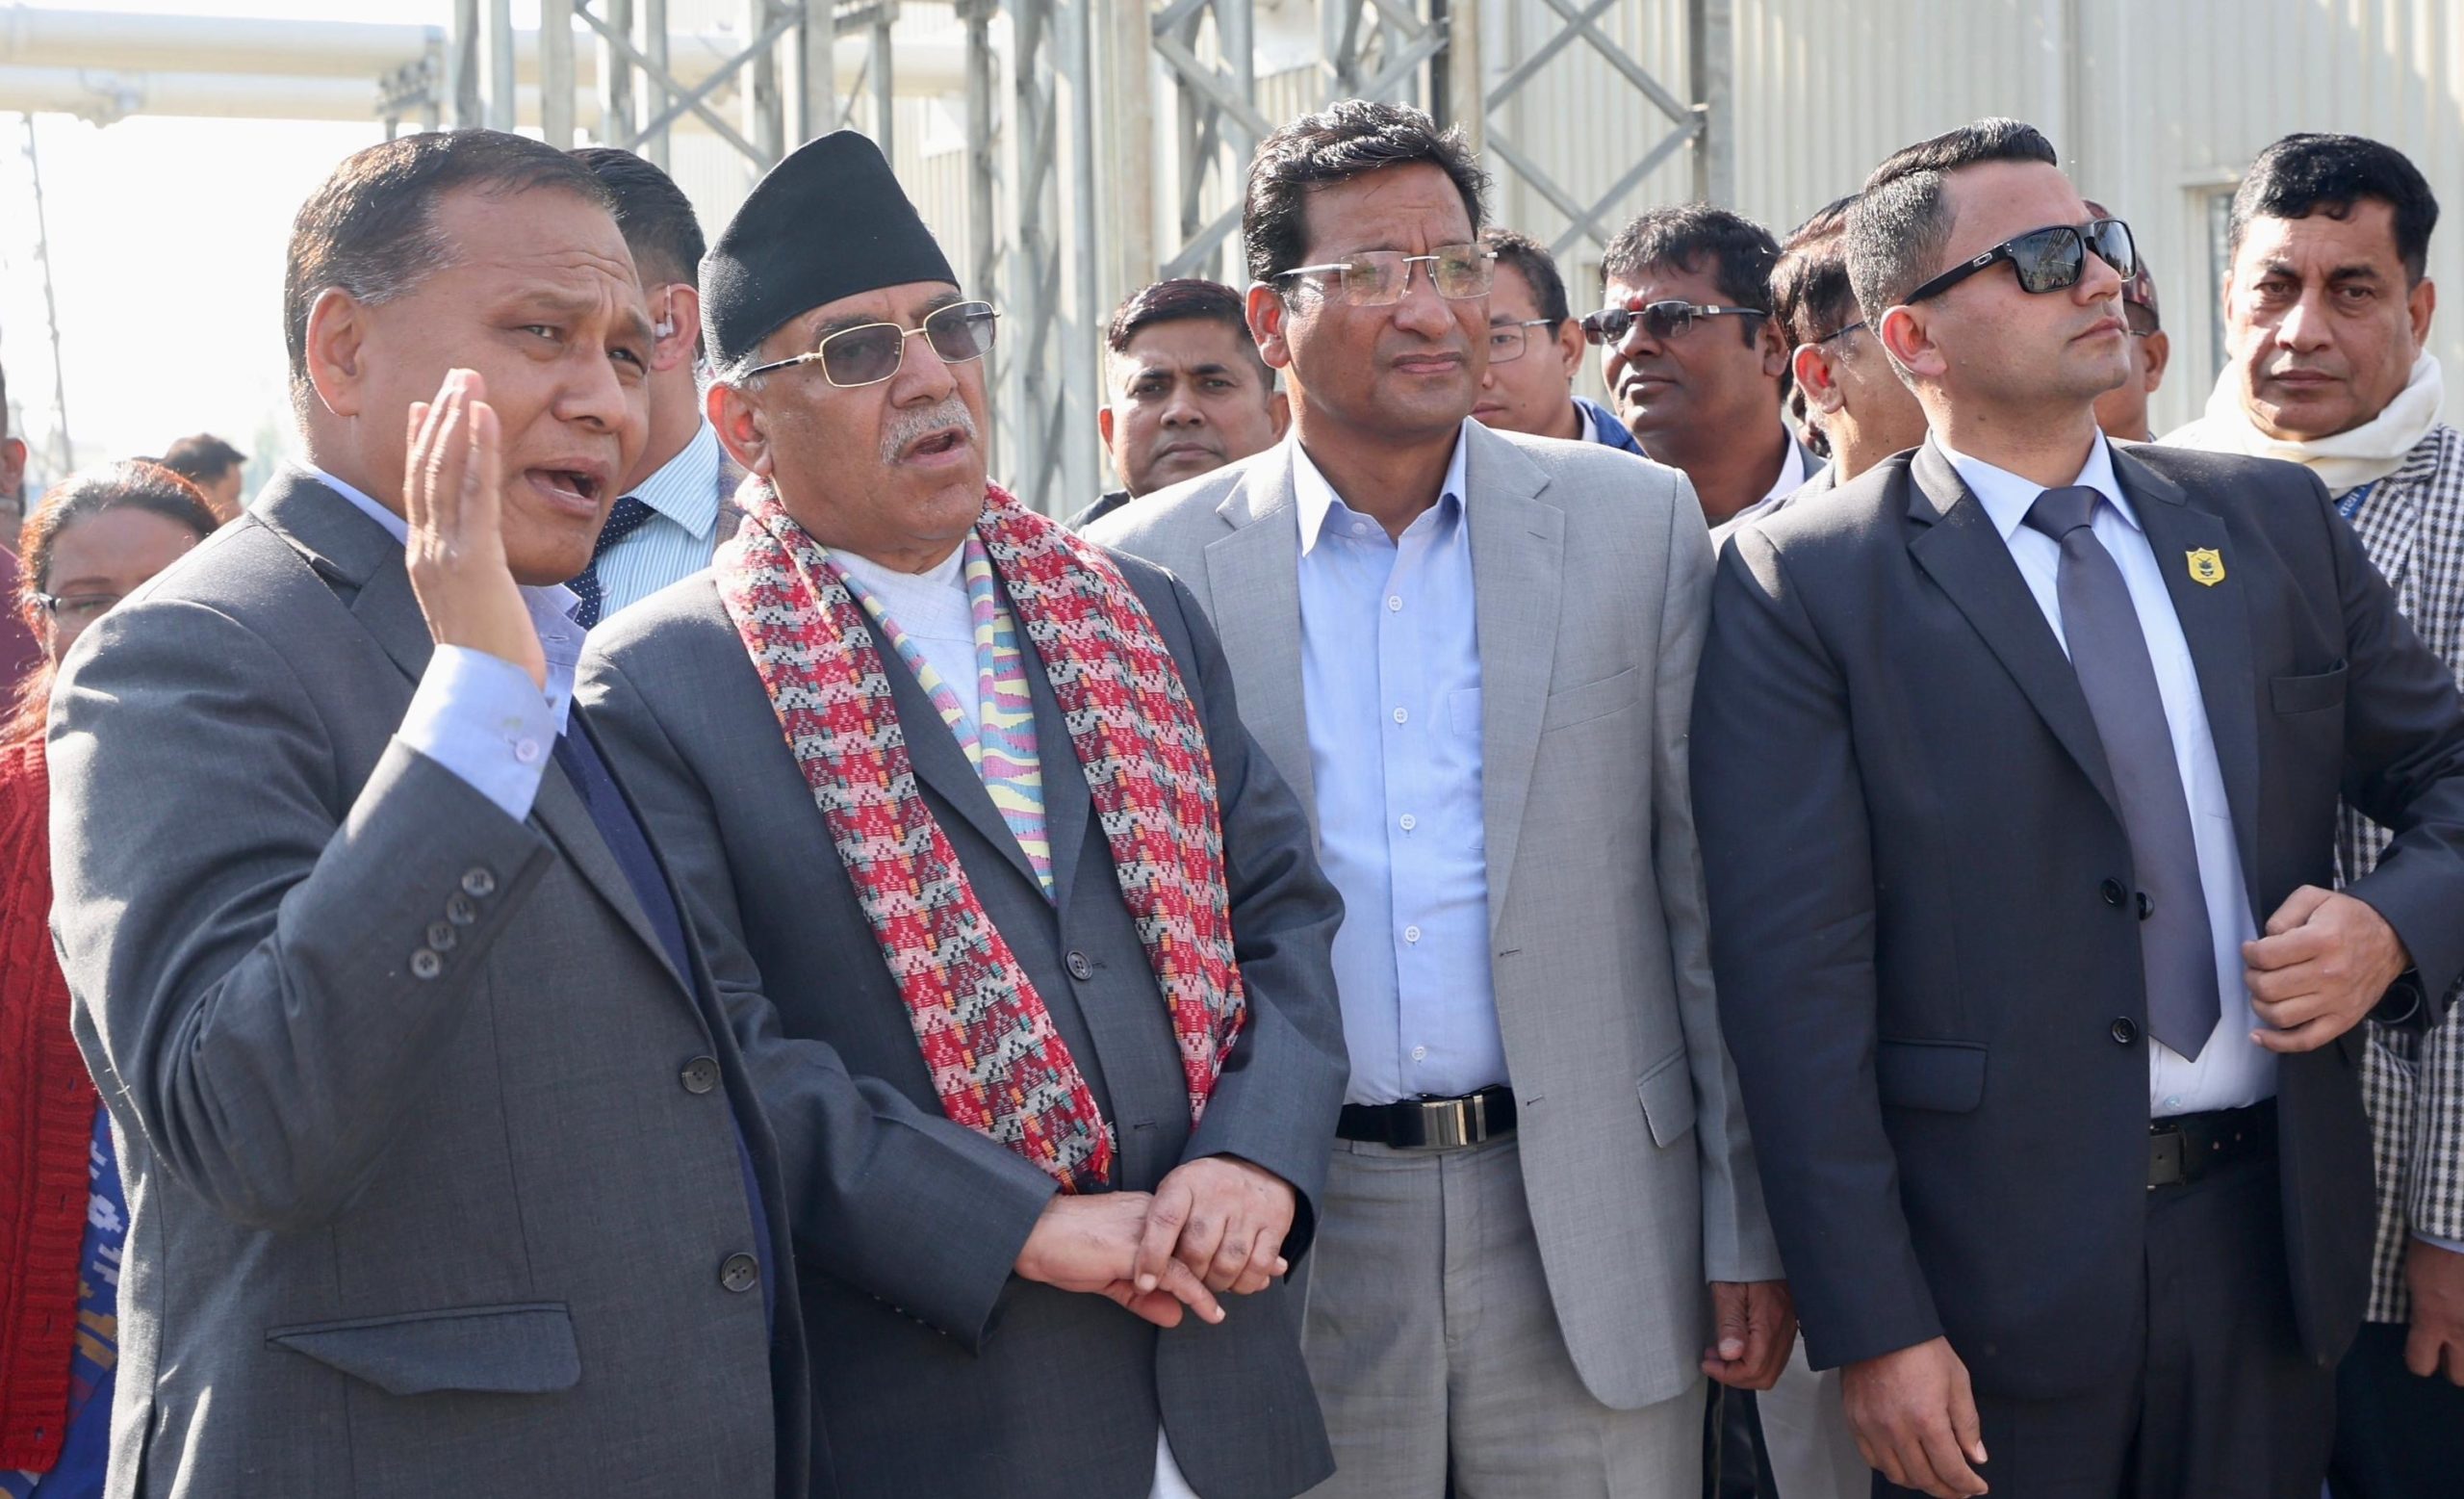 Inaruwa substation inaugurated: A crucial milestone in Nepal’s electricity transmission and distribution system